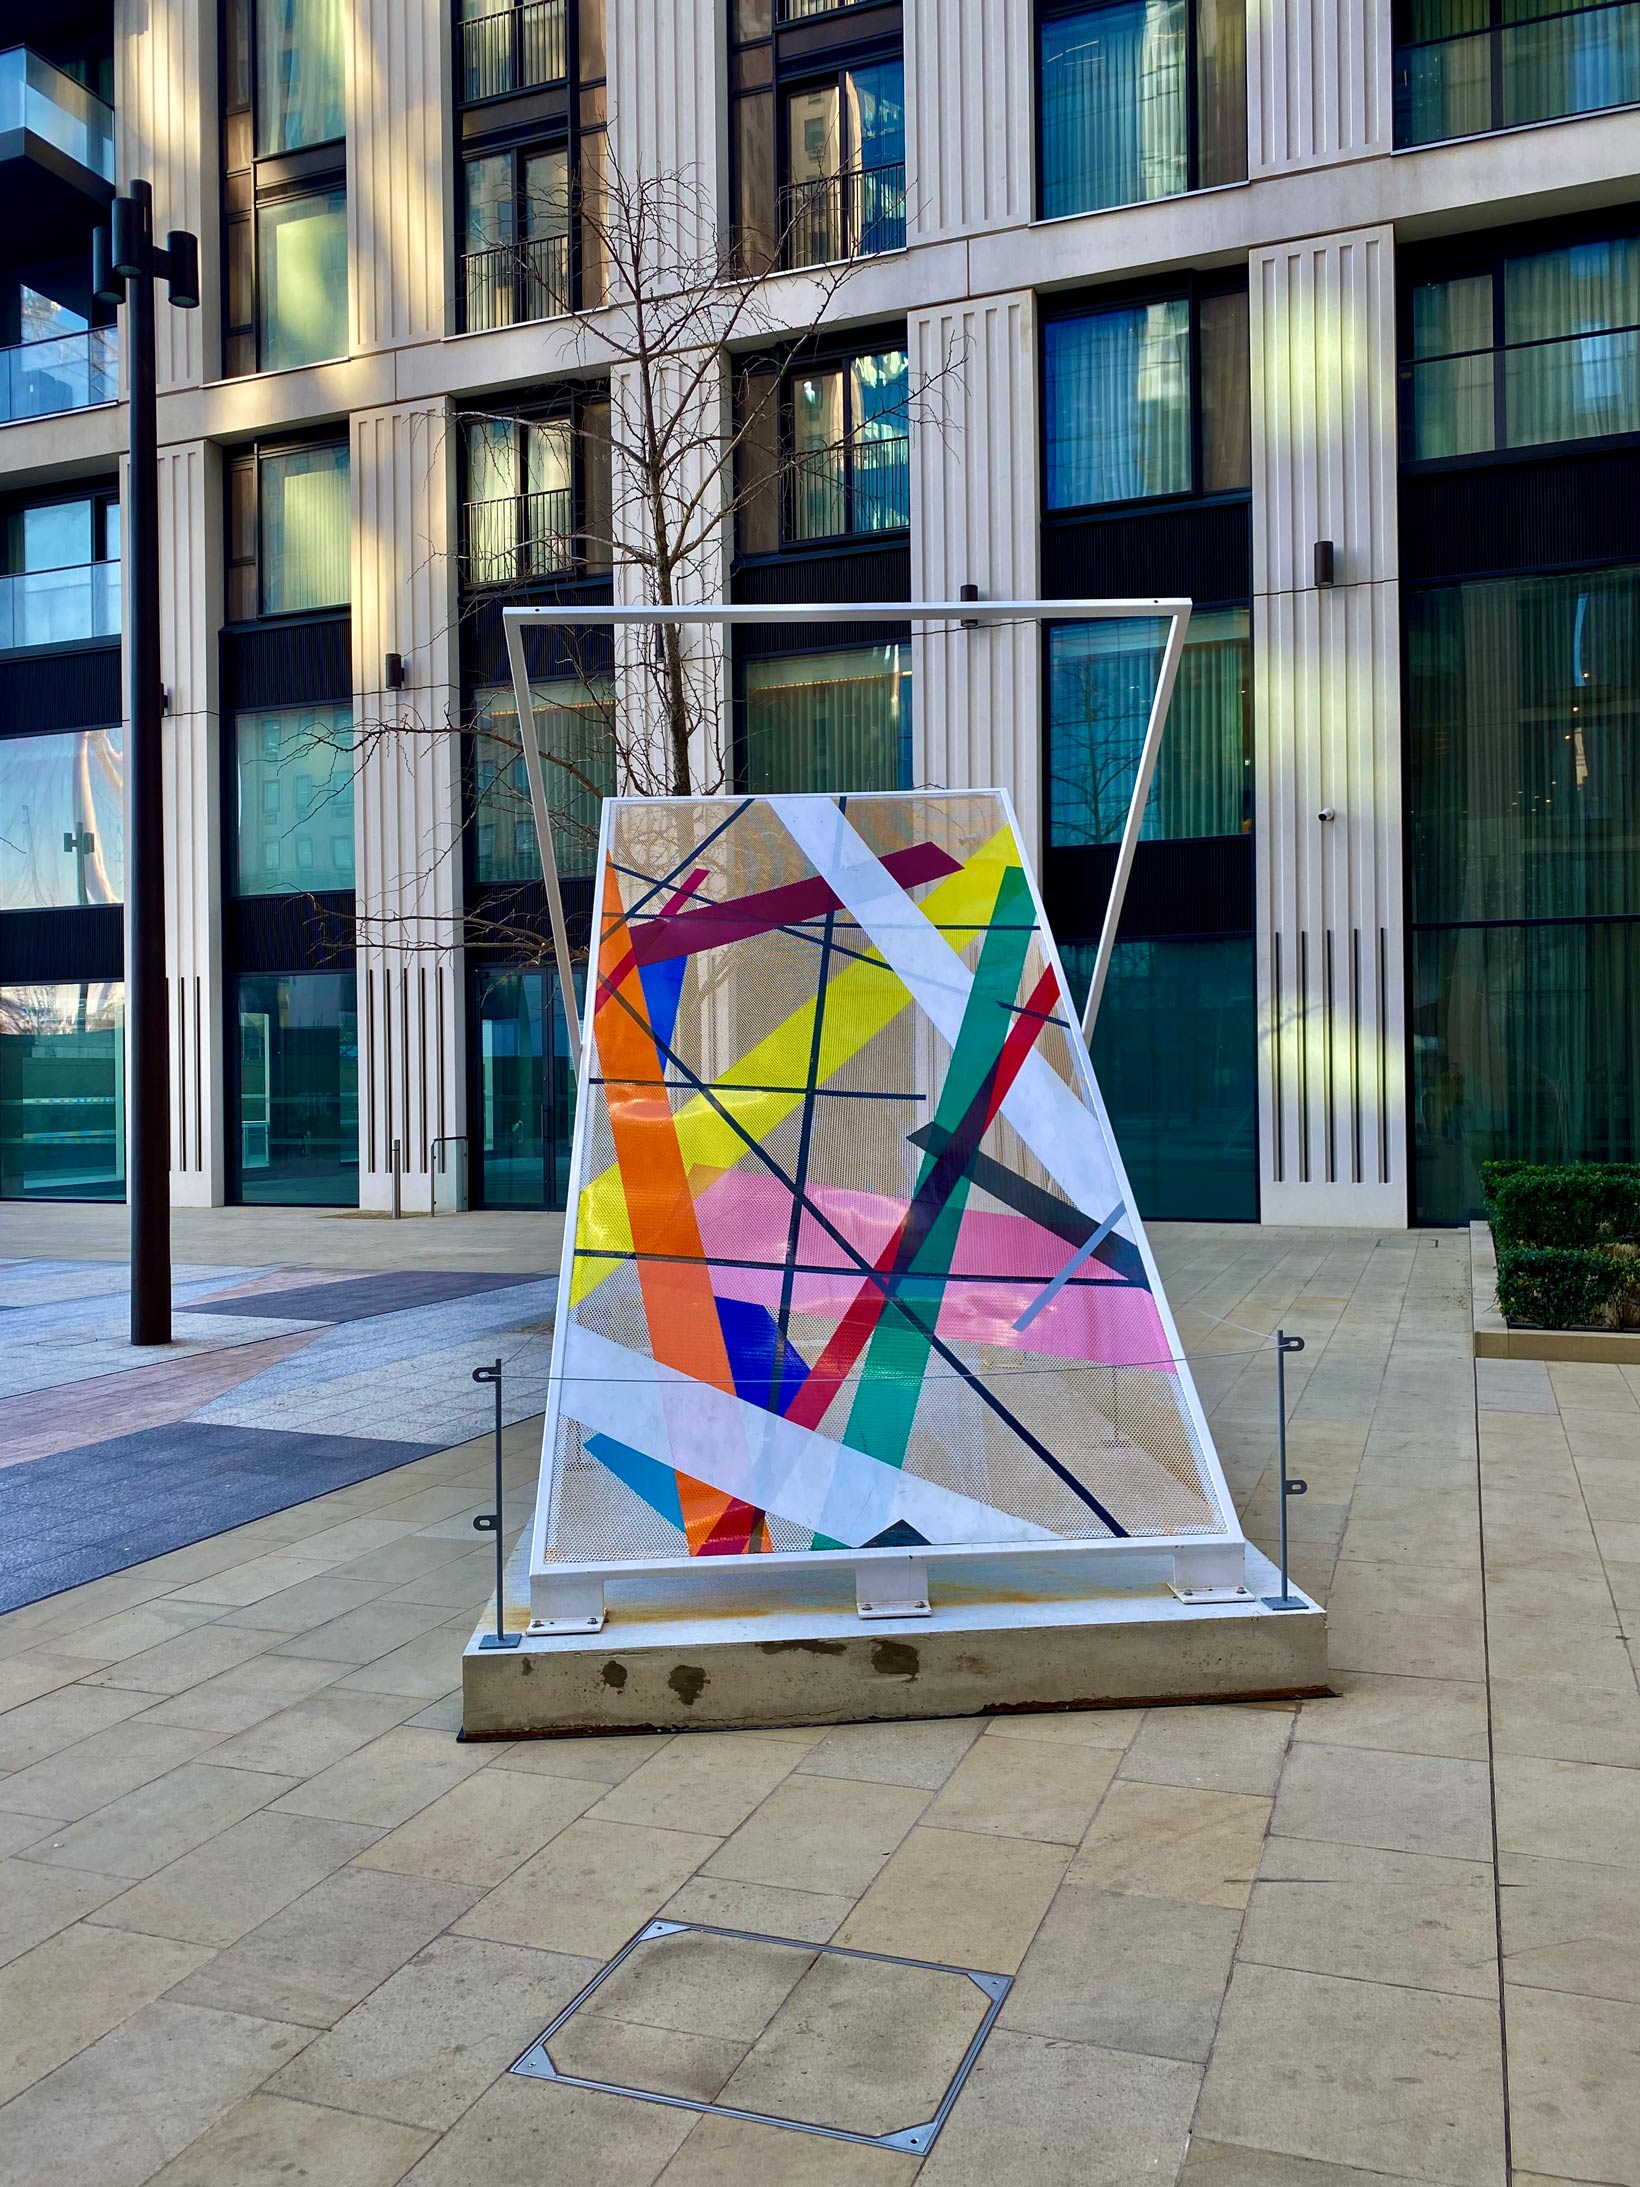 Solar-powered sculptures / charging stations unveiled at Southbank Place